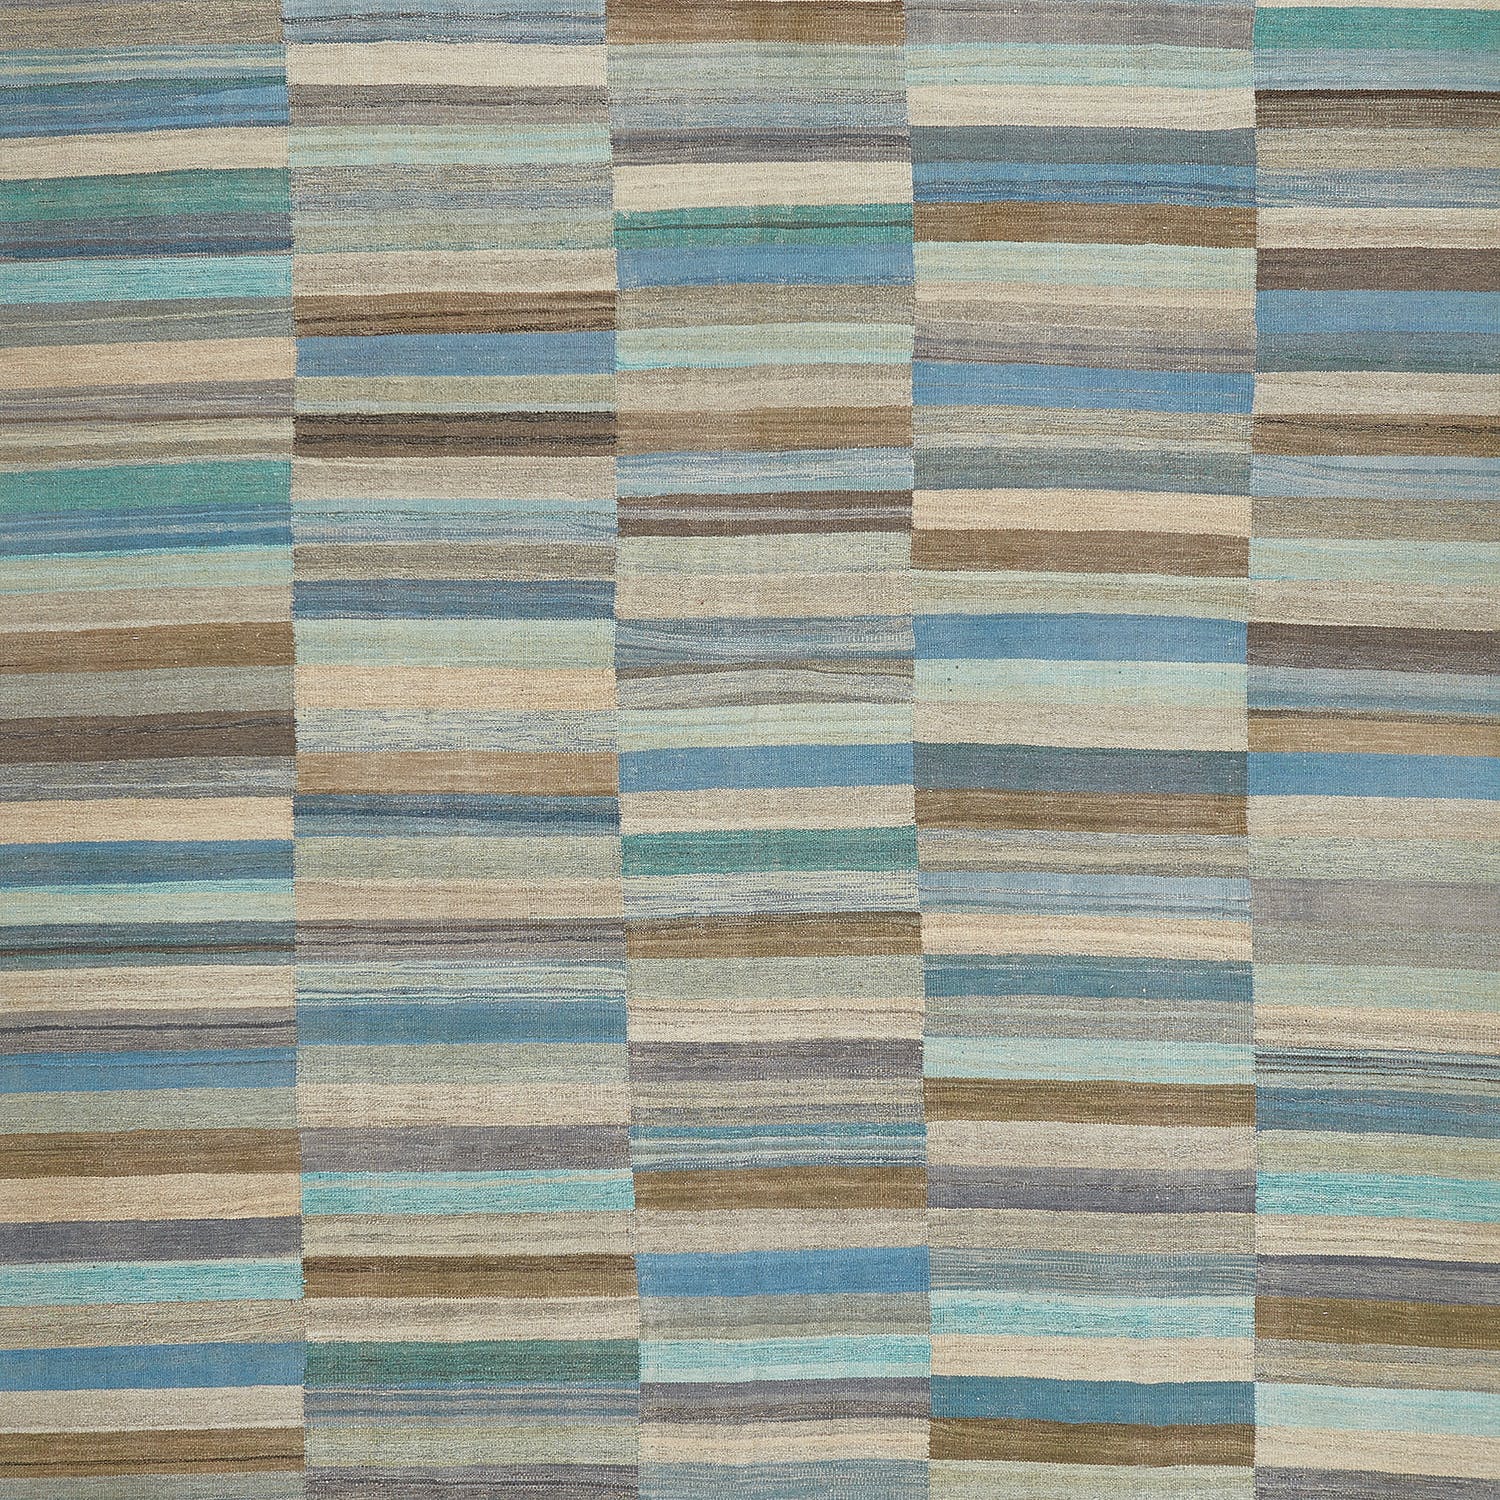 Textile with diverse horizontal stripes in earthy color palette